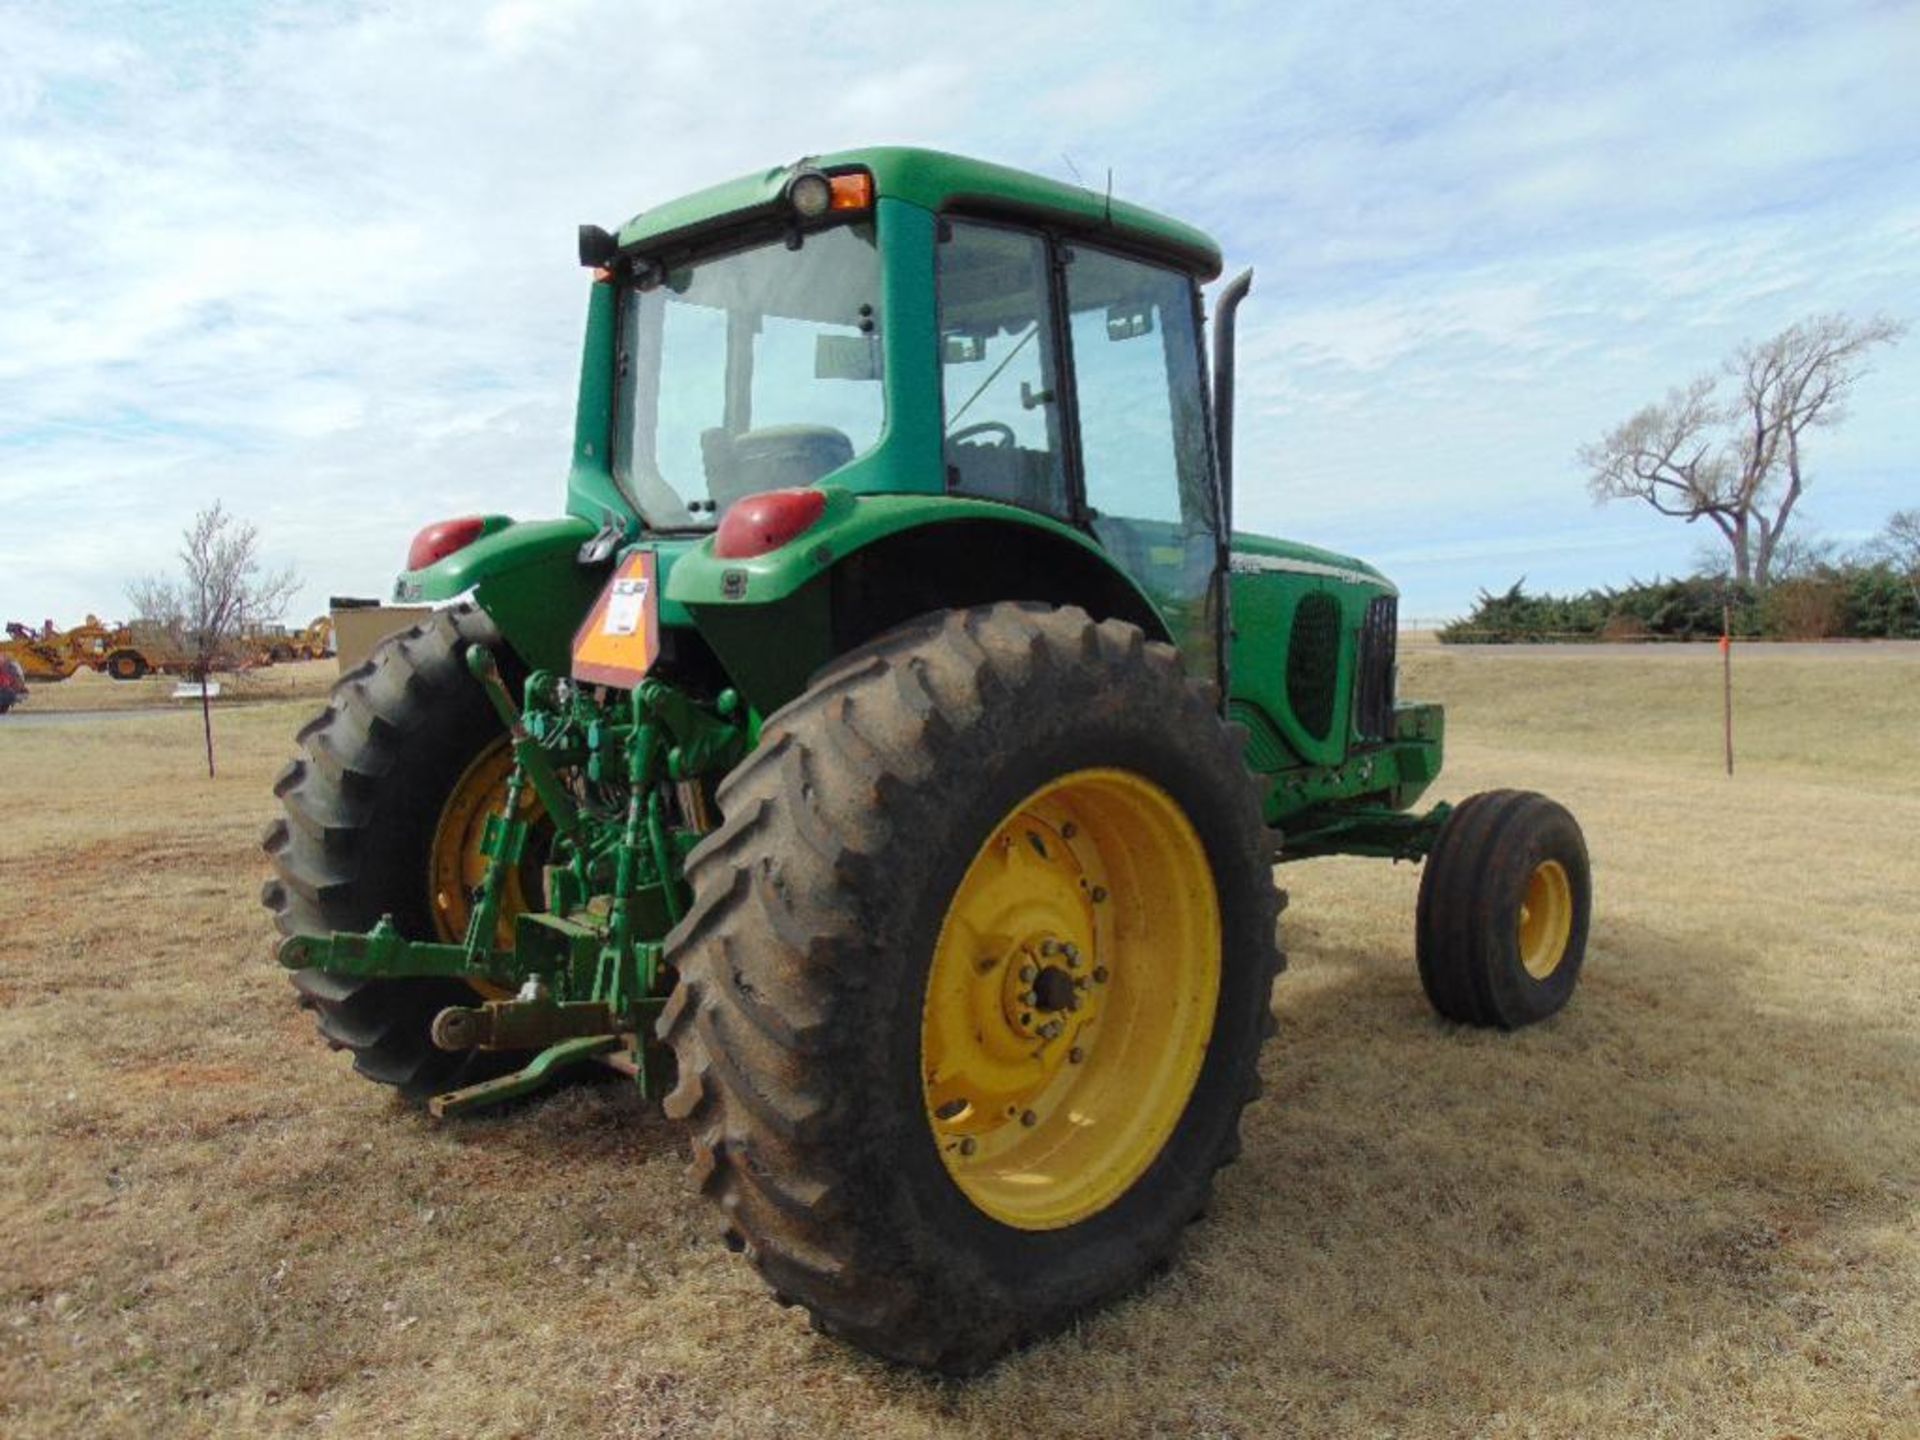 2005 John Deere 7220 Farm Tractor s/n 034661 Cab, a/c, 3pt, pto,hyd outlets, 4732 hrs - Image 4 of 7